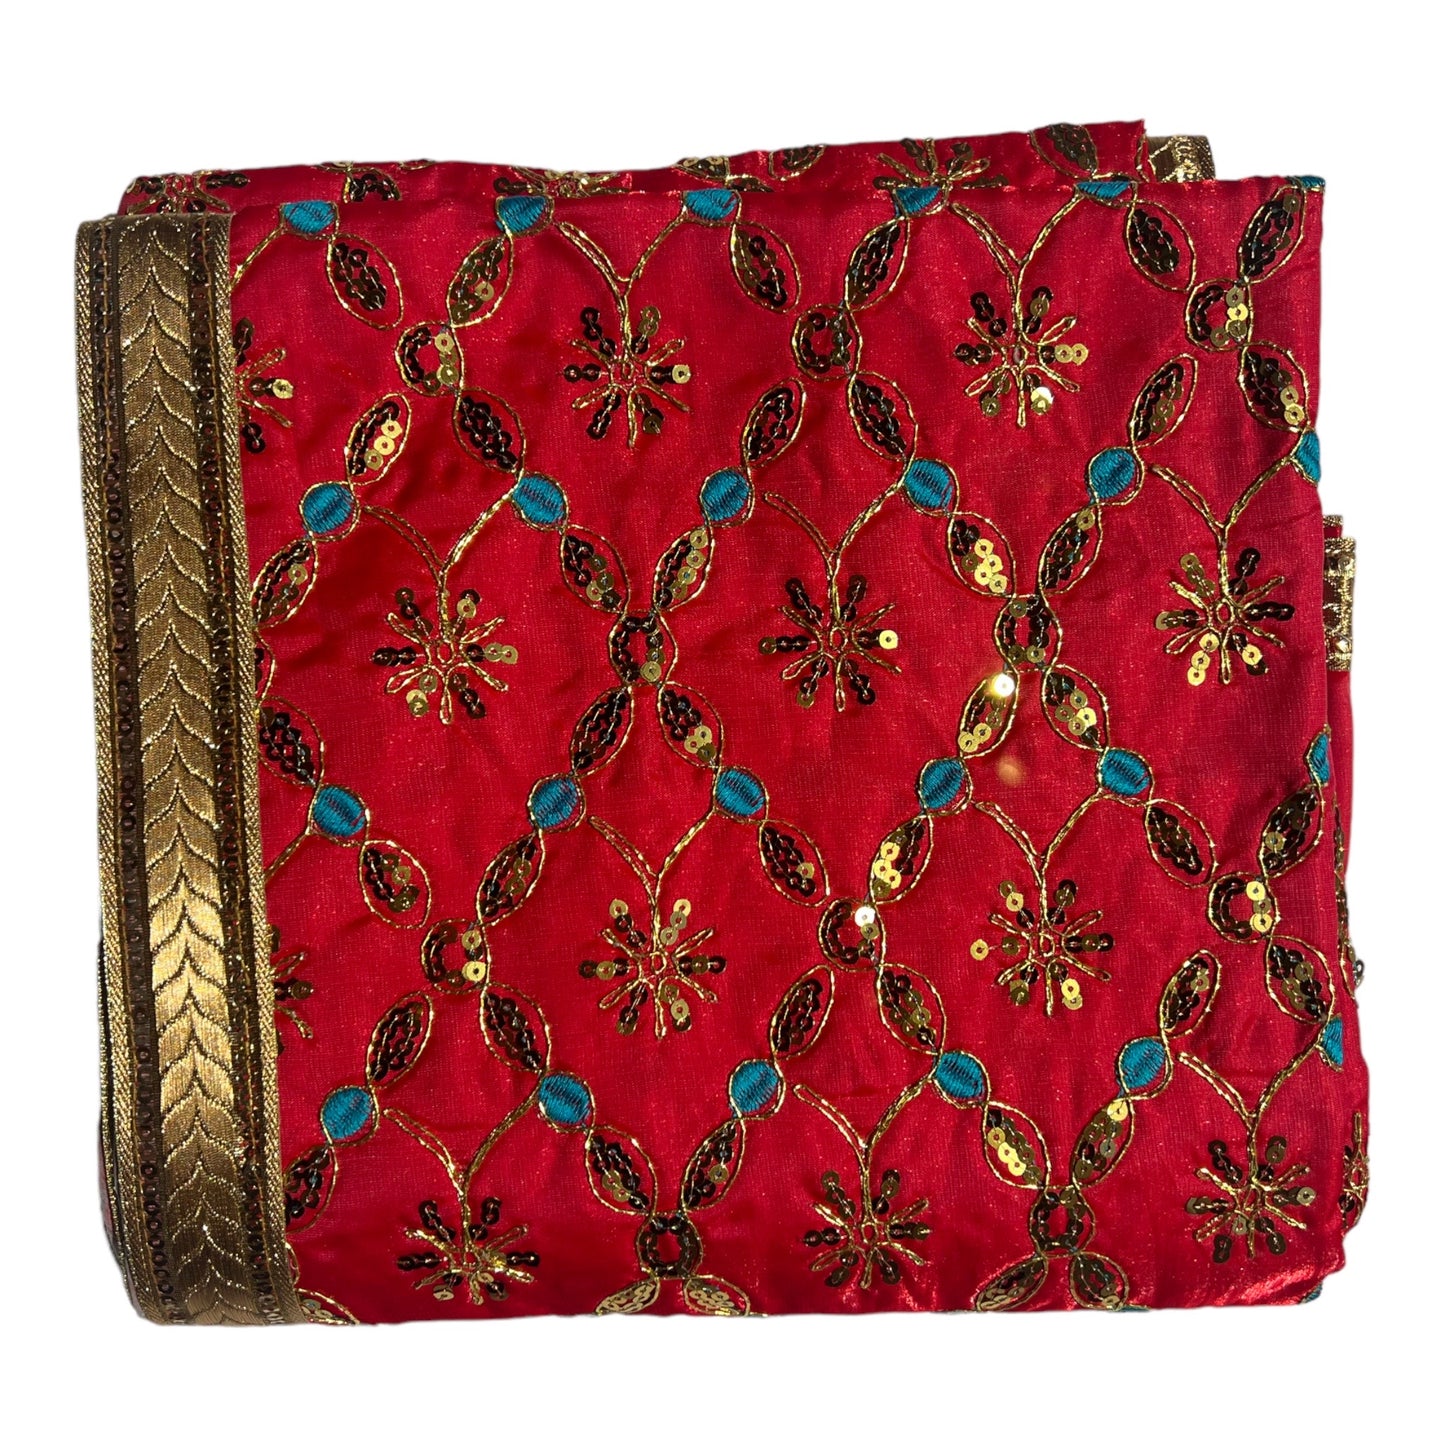 Heavy Embroidery Rumala Sahib Double Set with Gota Lining ( Colors available Red Orange Green Yellow Maroon)